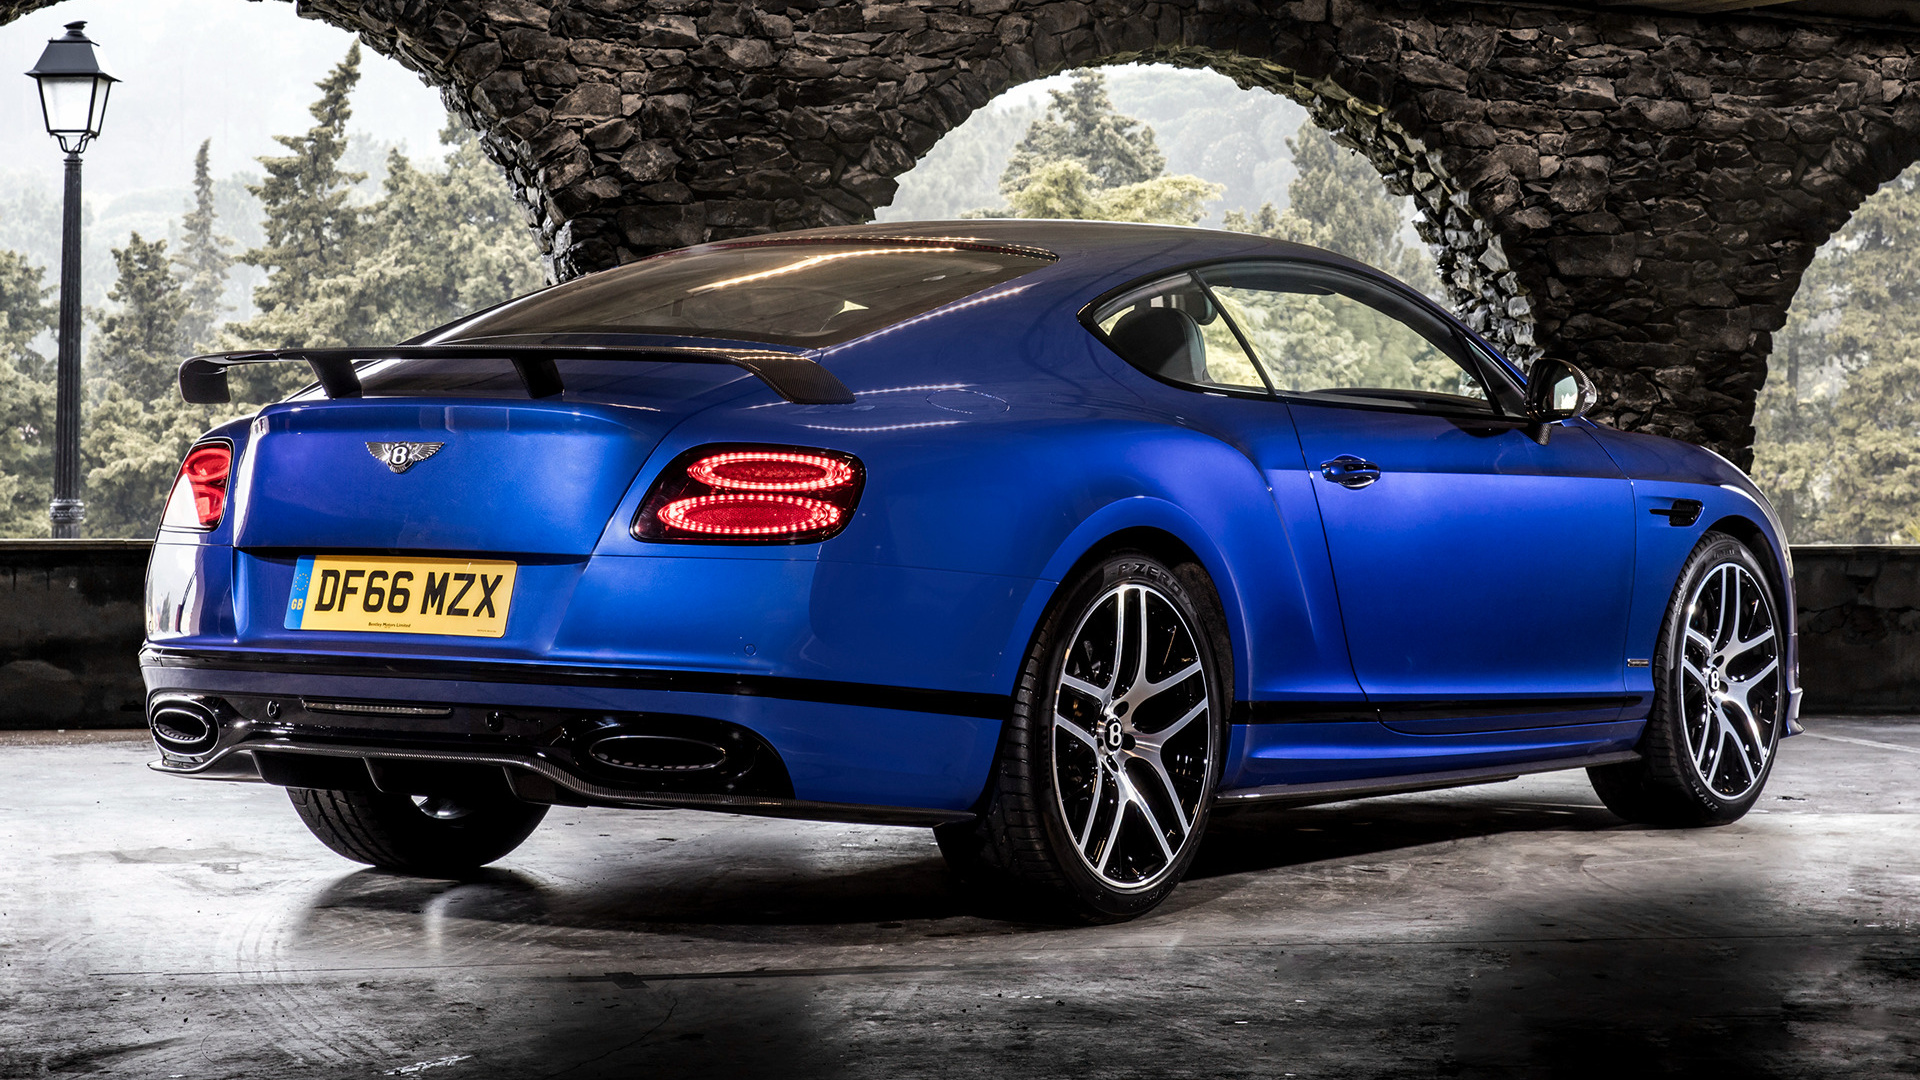 2017 Bentley Continental Supersports Hd Wallpaper Background Image 1920x1080